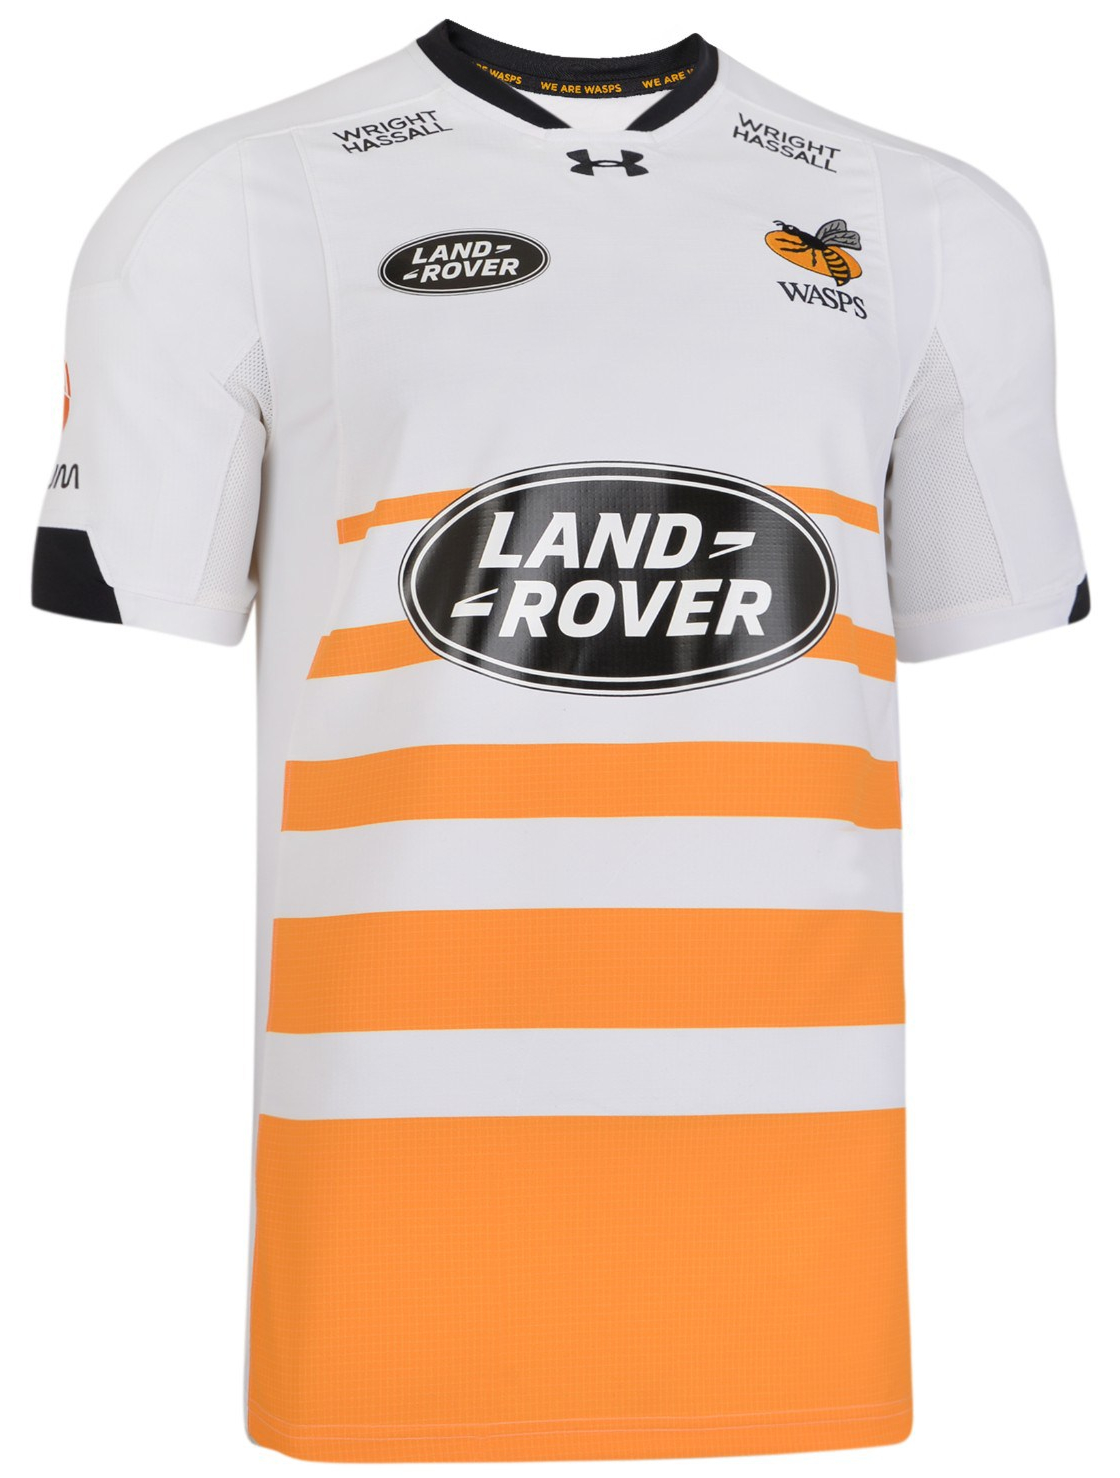 wasps rugby jersey